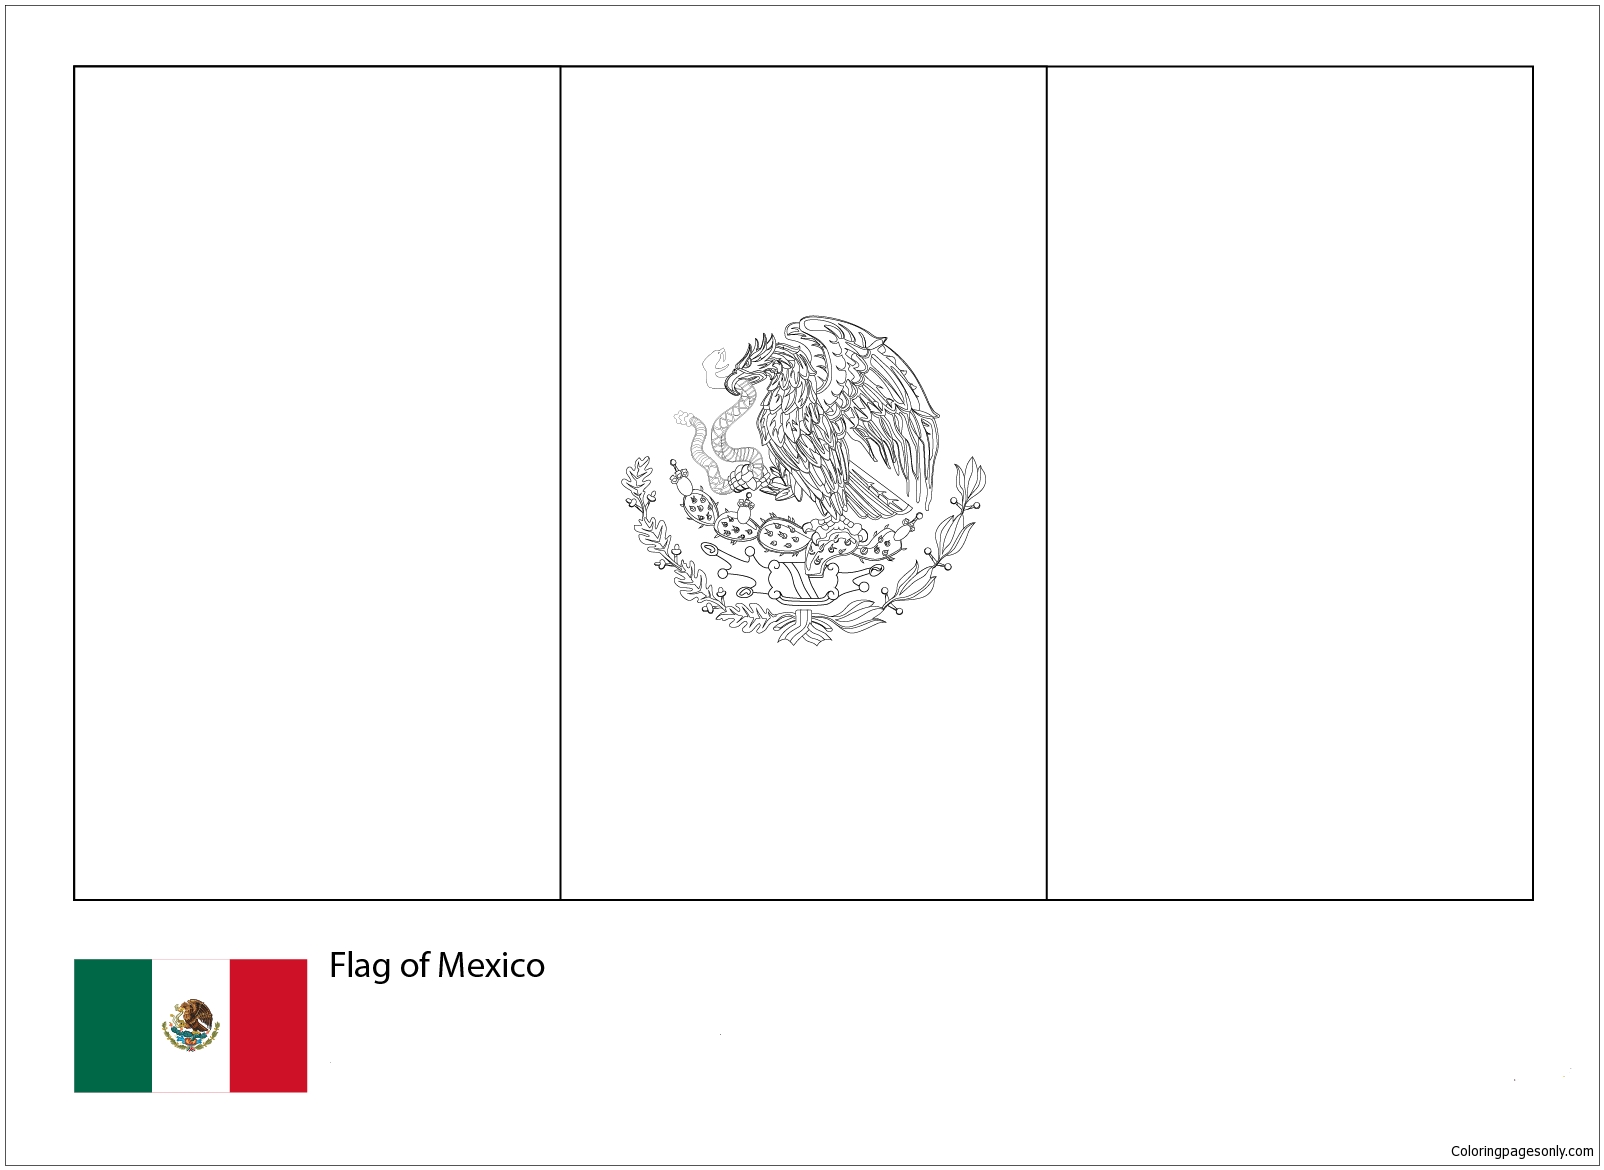 Download Flag of Mexico-World Cup 2018 Coloring Page - Free Coloring Pages Online